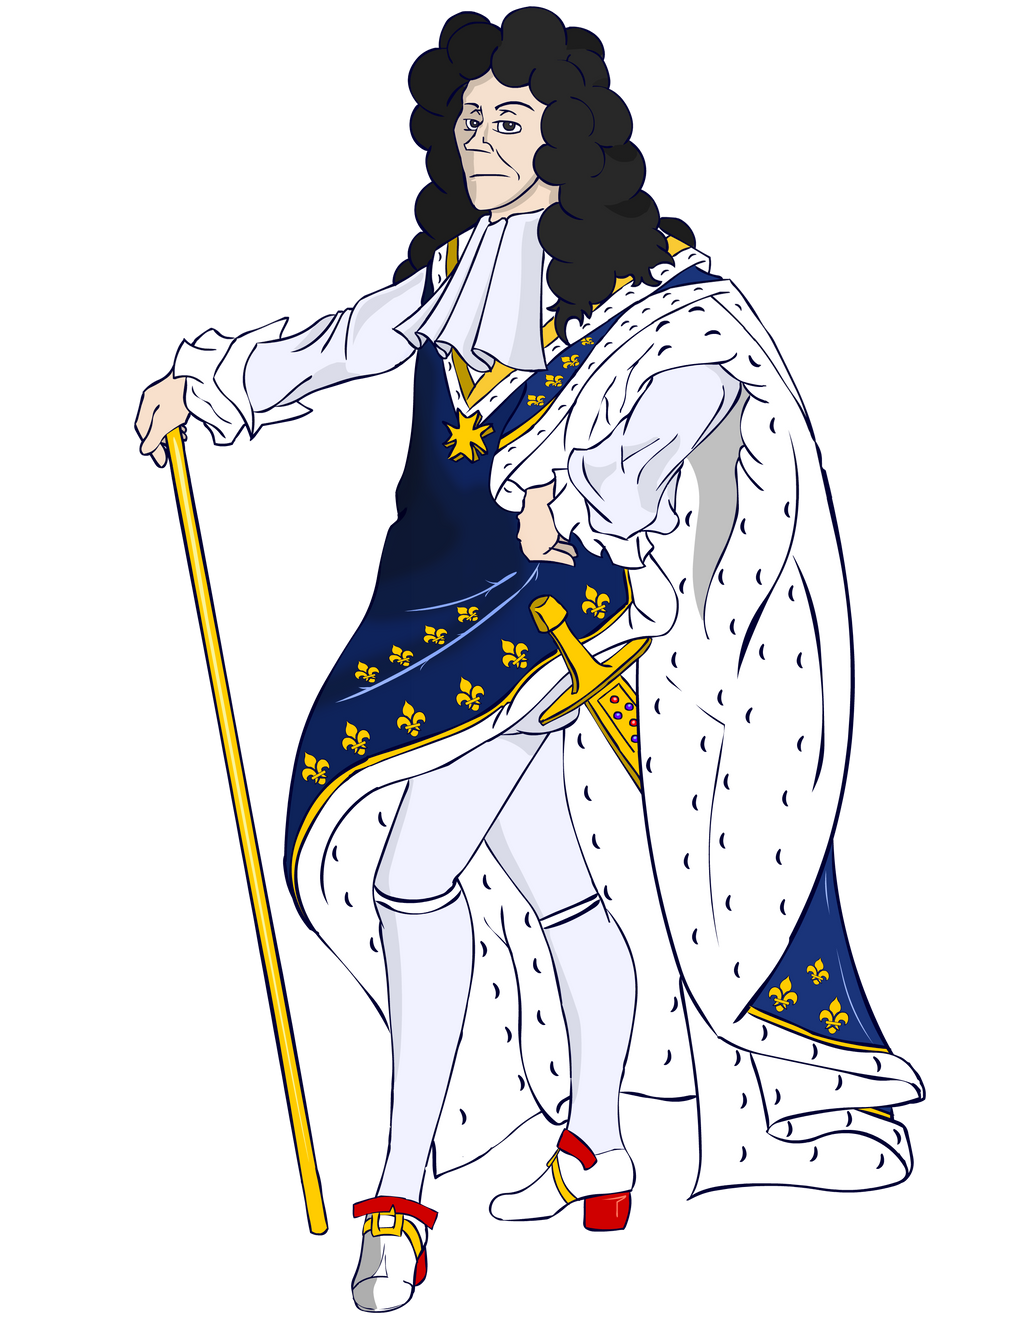 King Louis XIV of France, The Sun King